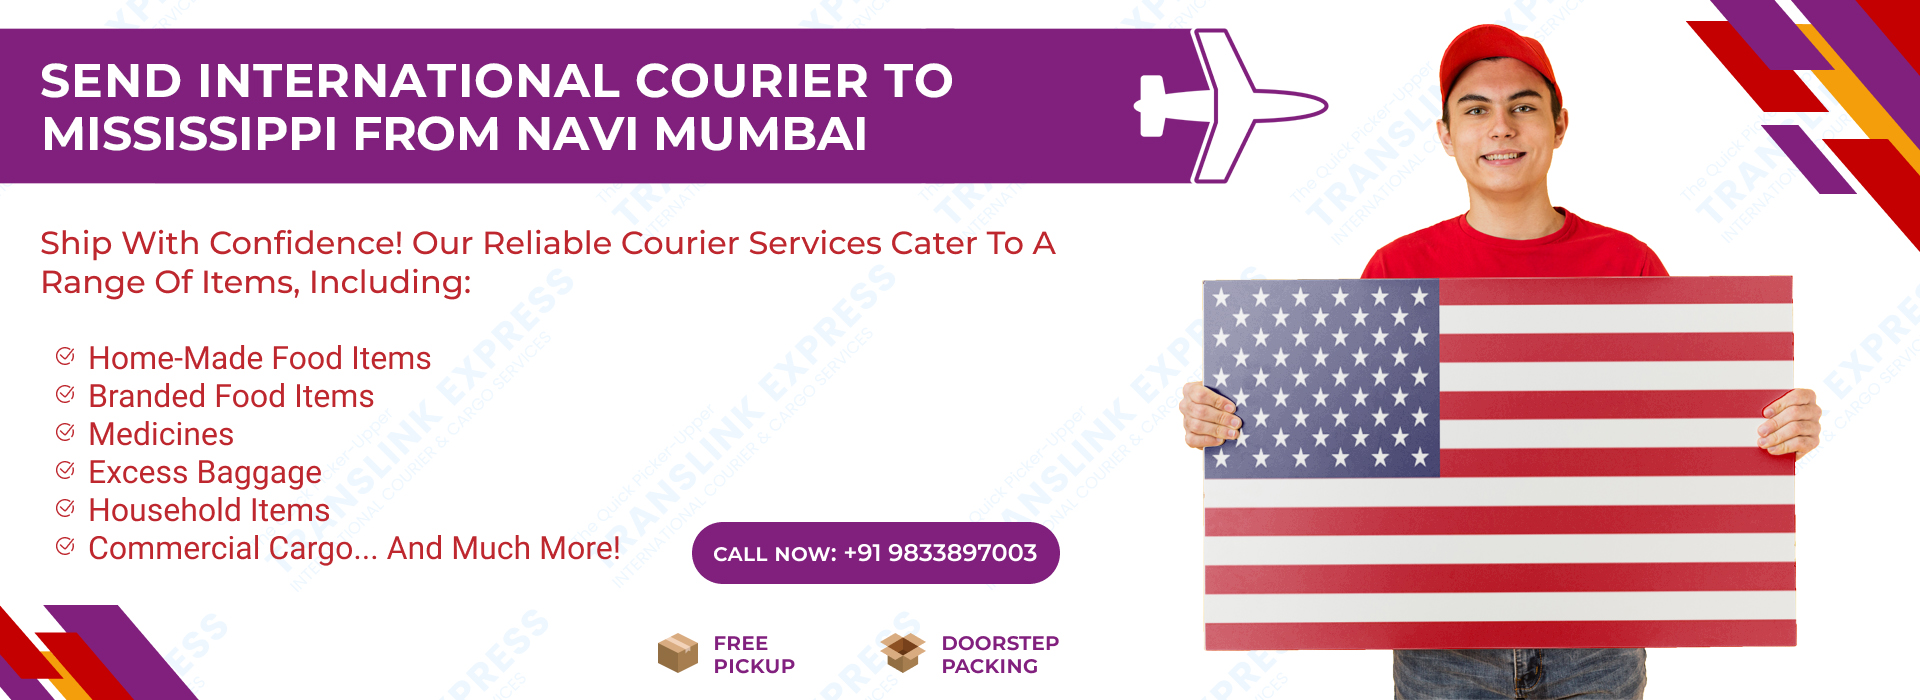 Courier to Mississippi From Navi Mumbai